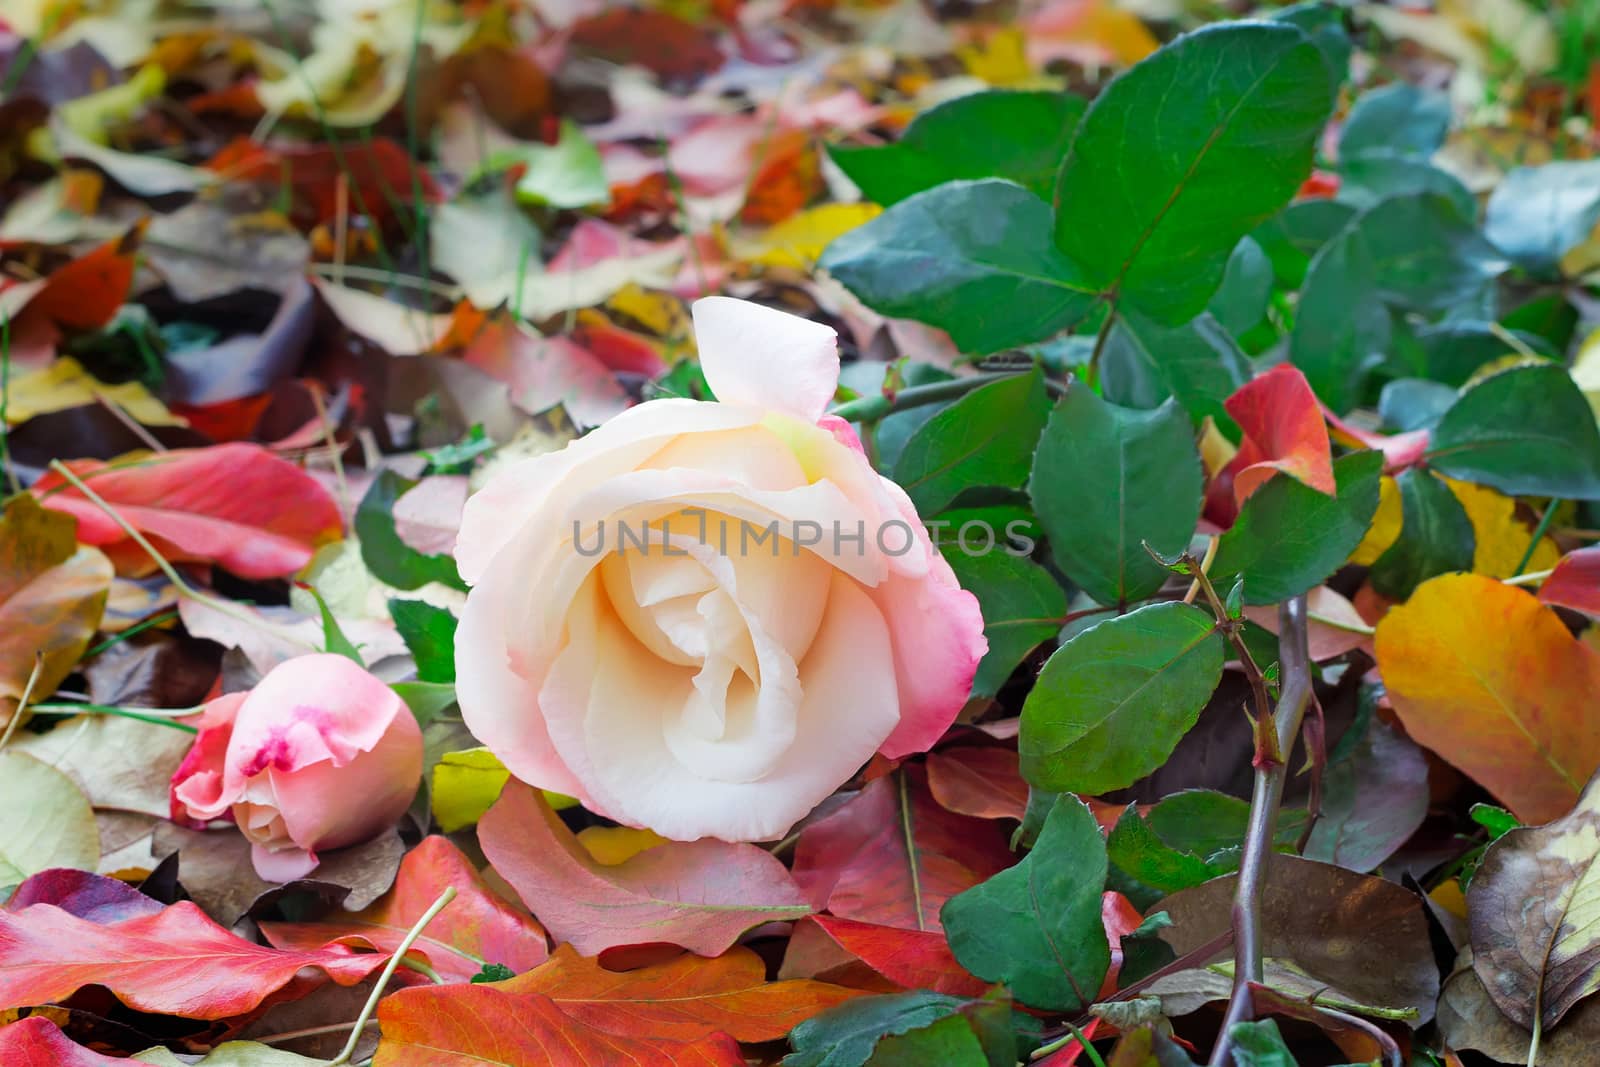 Among the red and yellow fallen leaves is a beautiful pale rose-pink with green leaves.